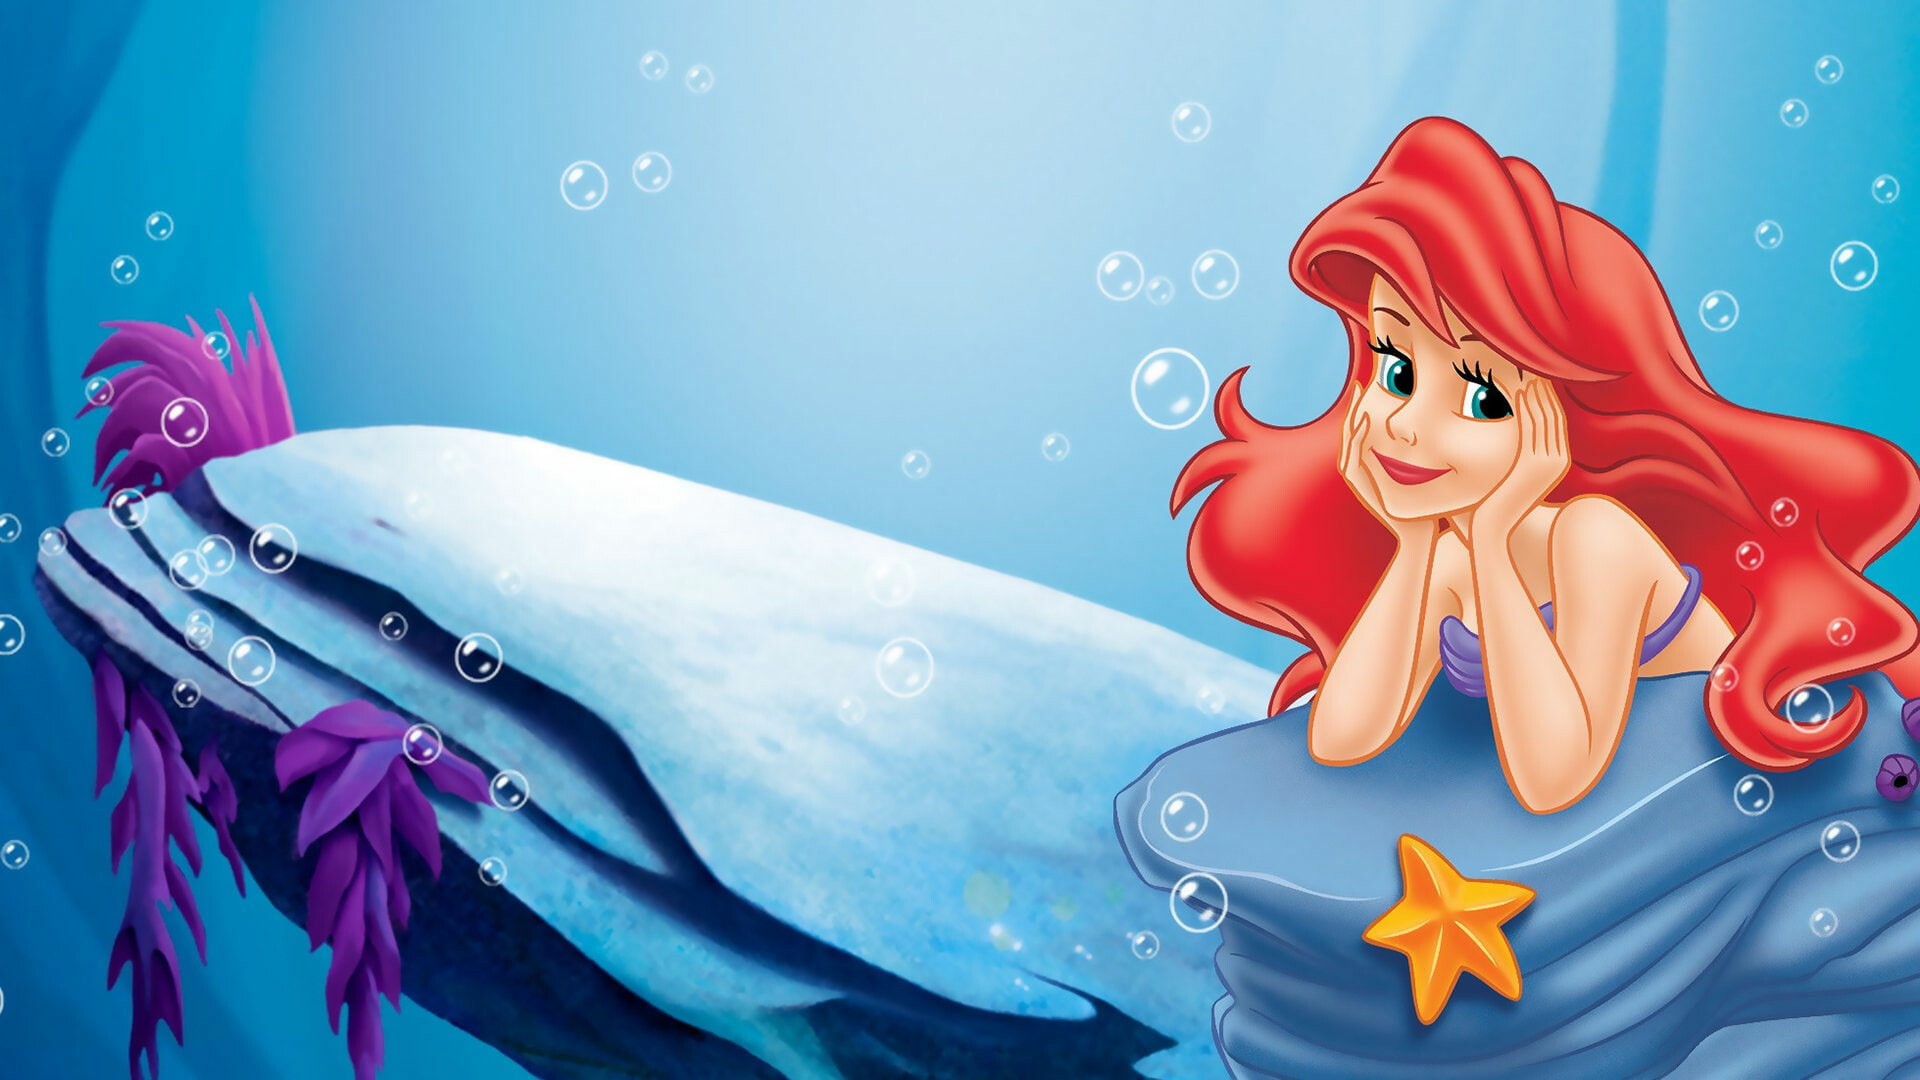 The Little Mermaid: The story of Ariel, A beautiful and spirited young princess. 1920x1080 Full HD Background.